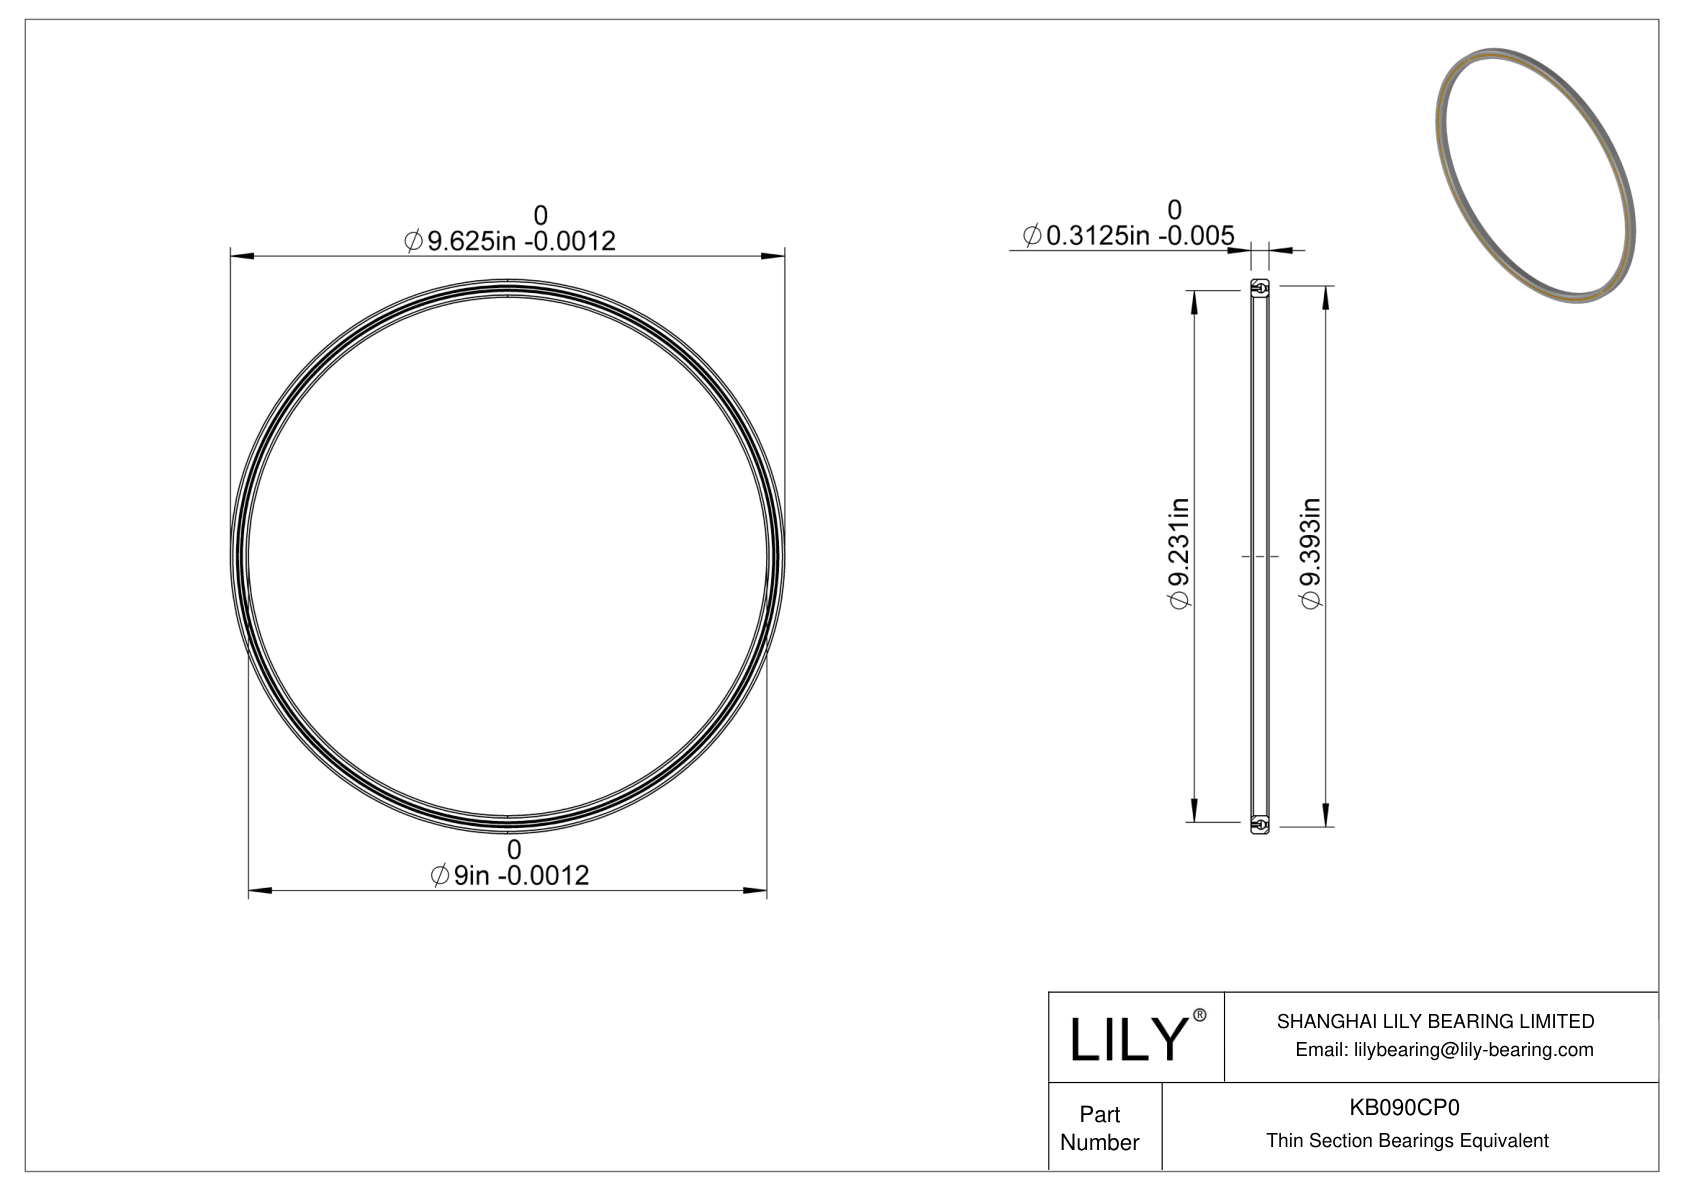 KB090CP0 Constant Section (CS) Bearings cad drawing